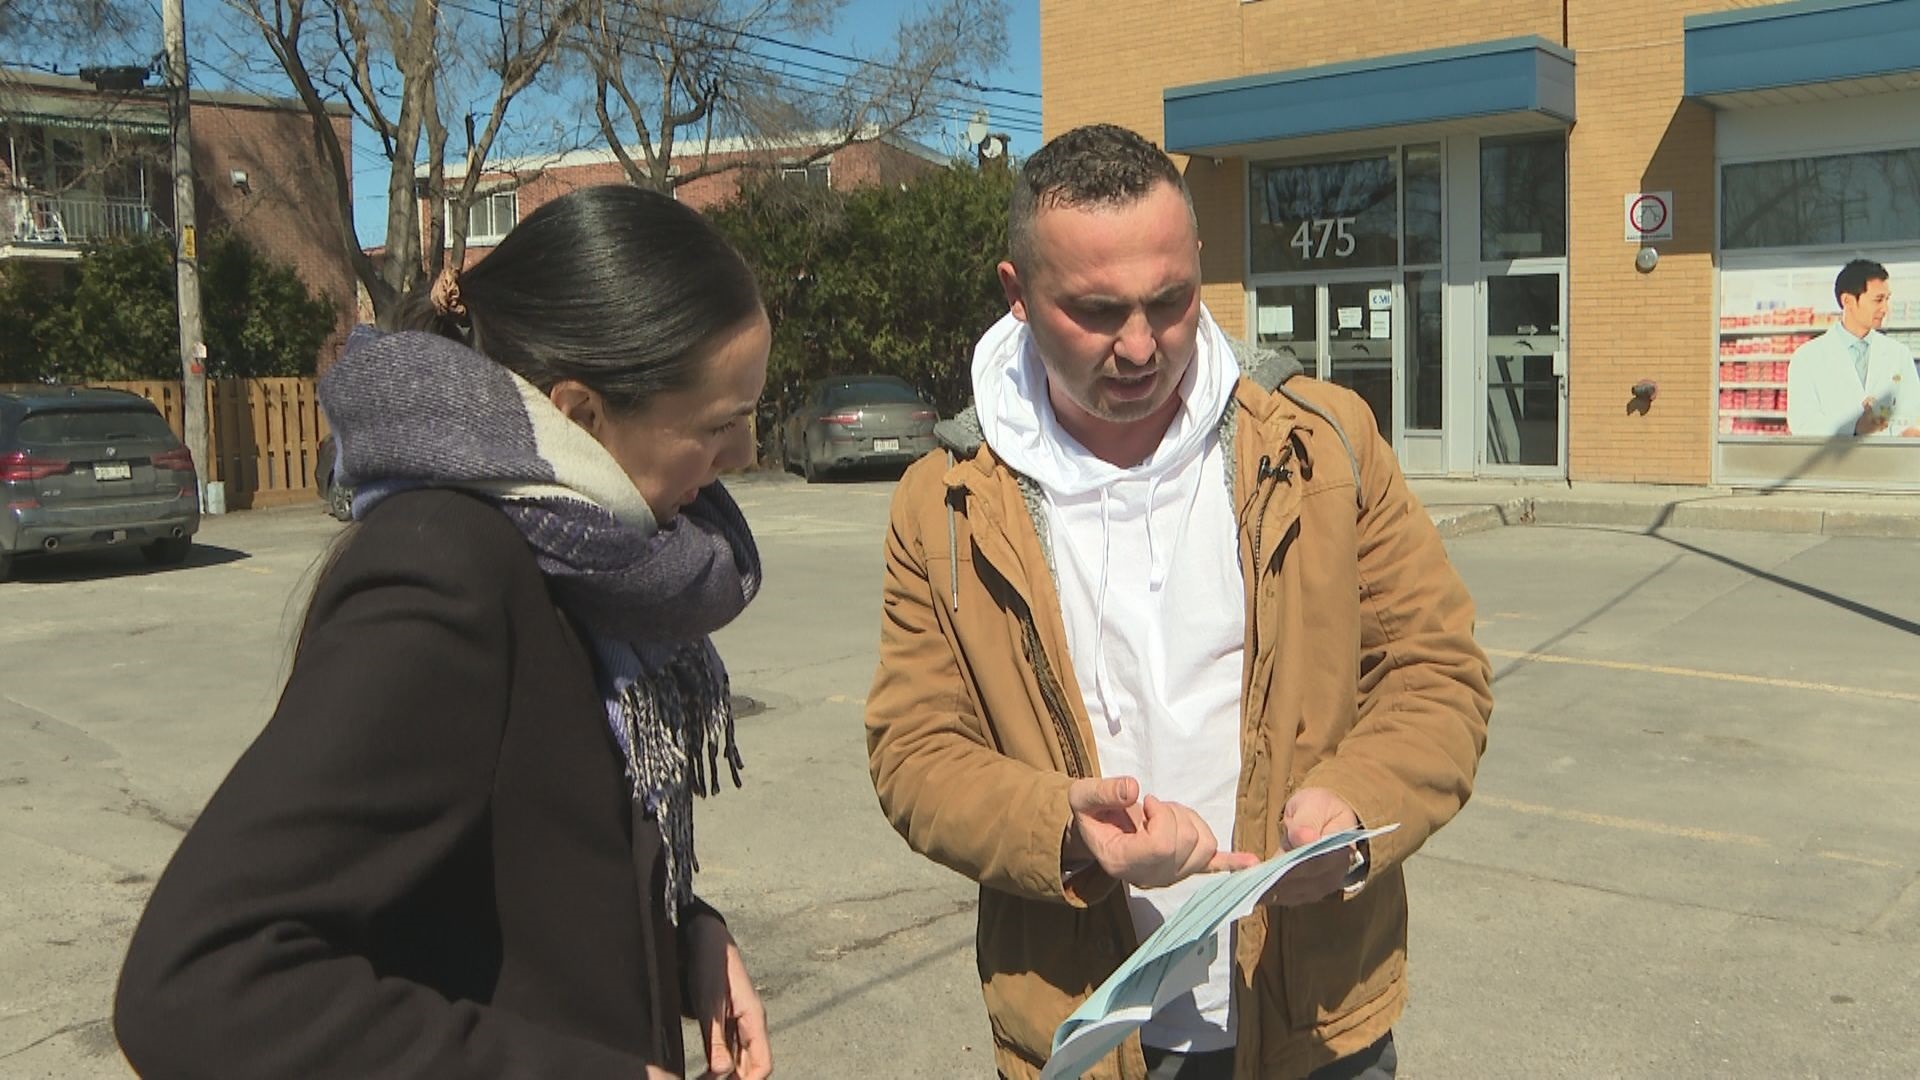 Montreal man alleges he was attacked for ‘looking’ Muslim